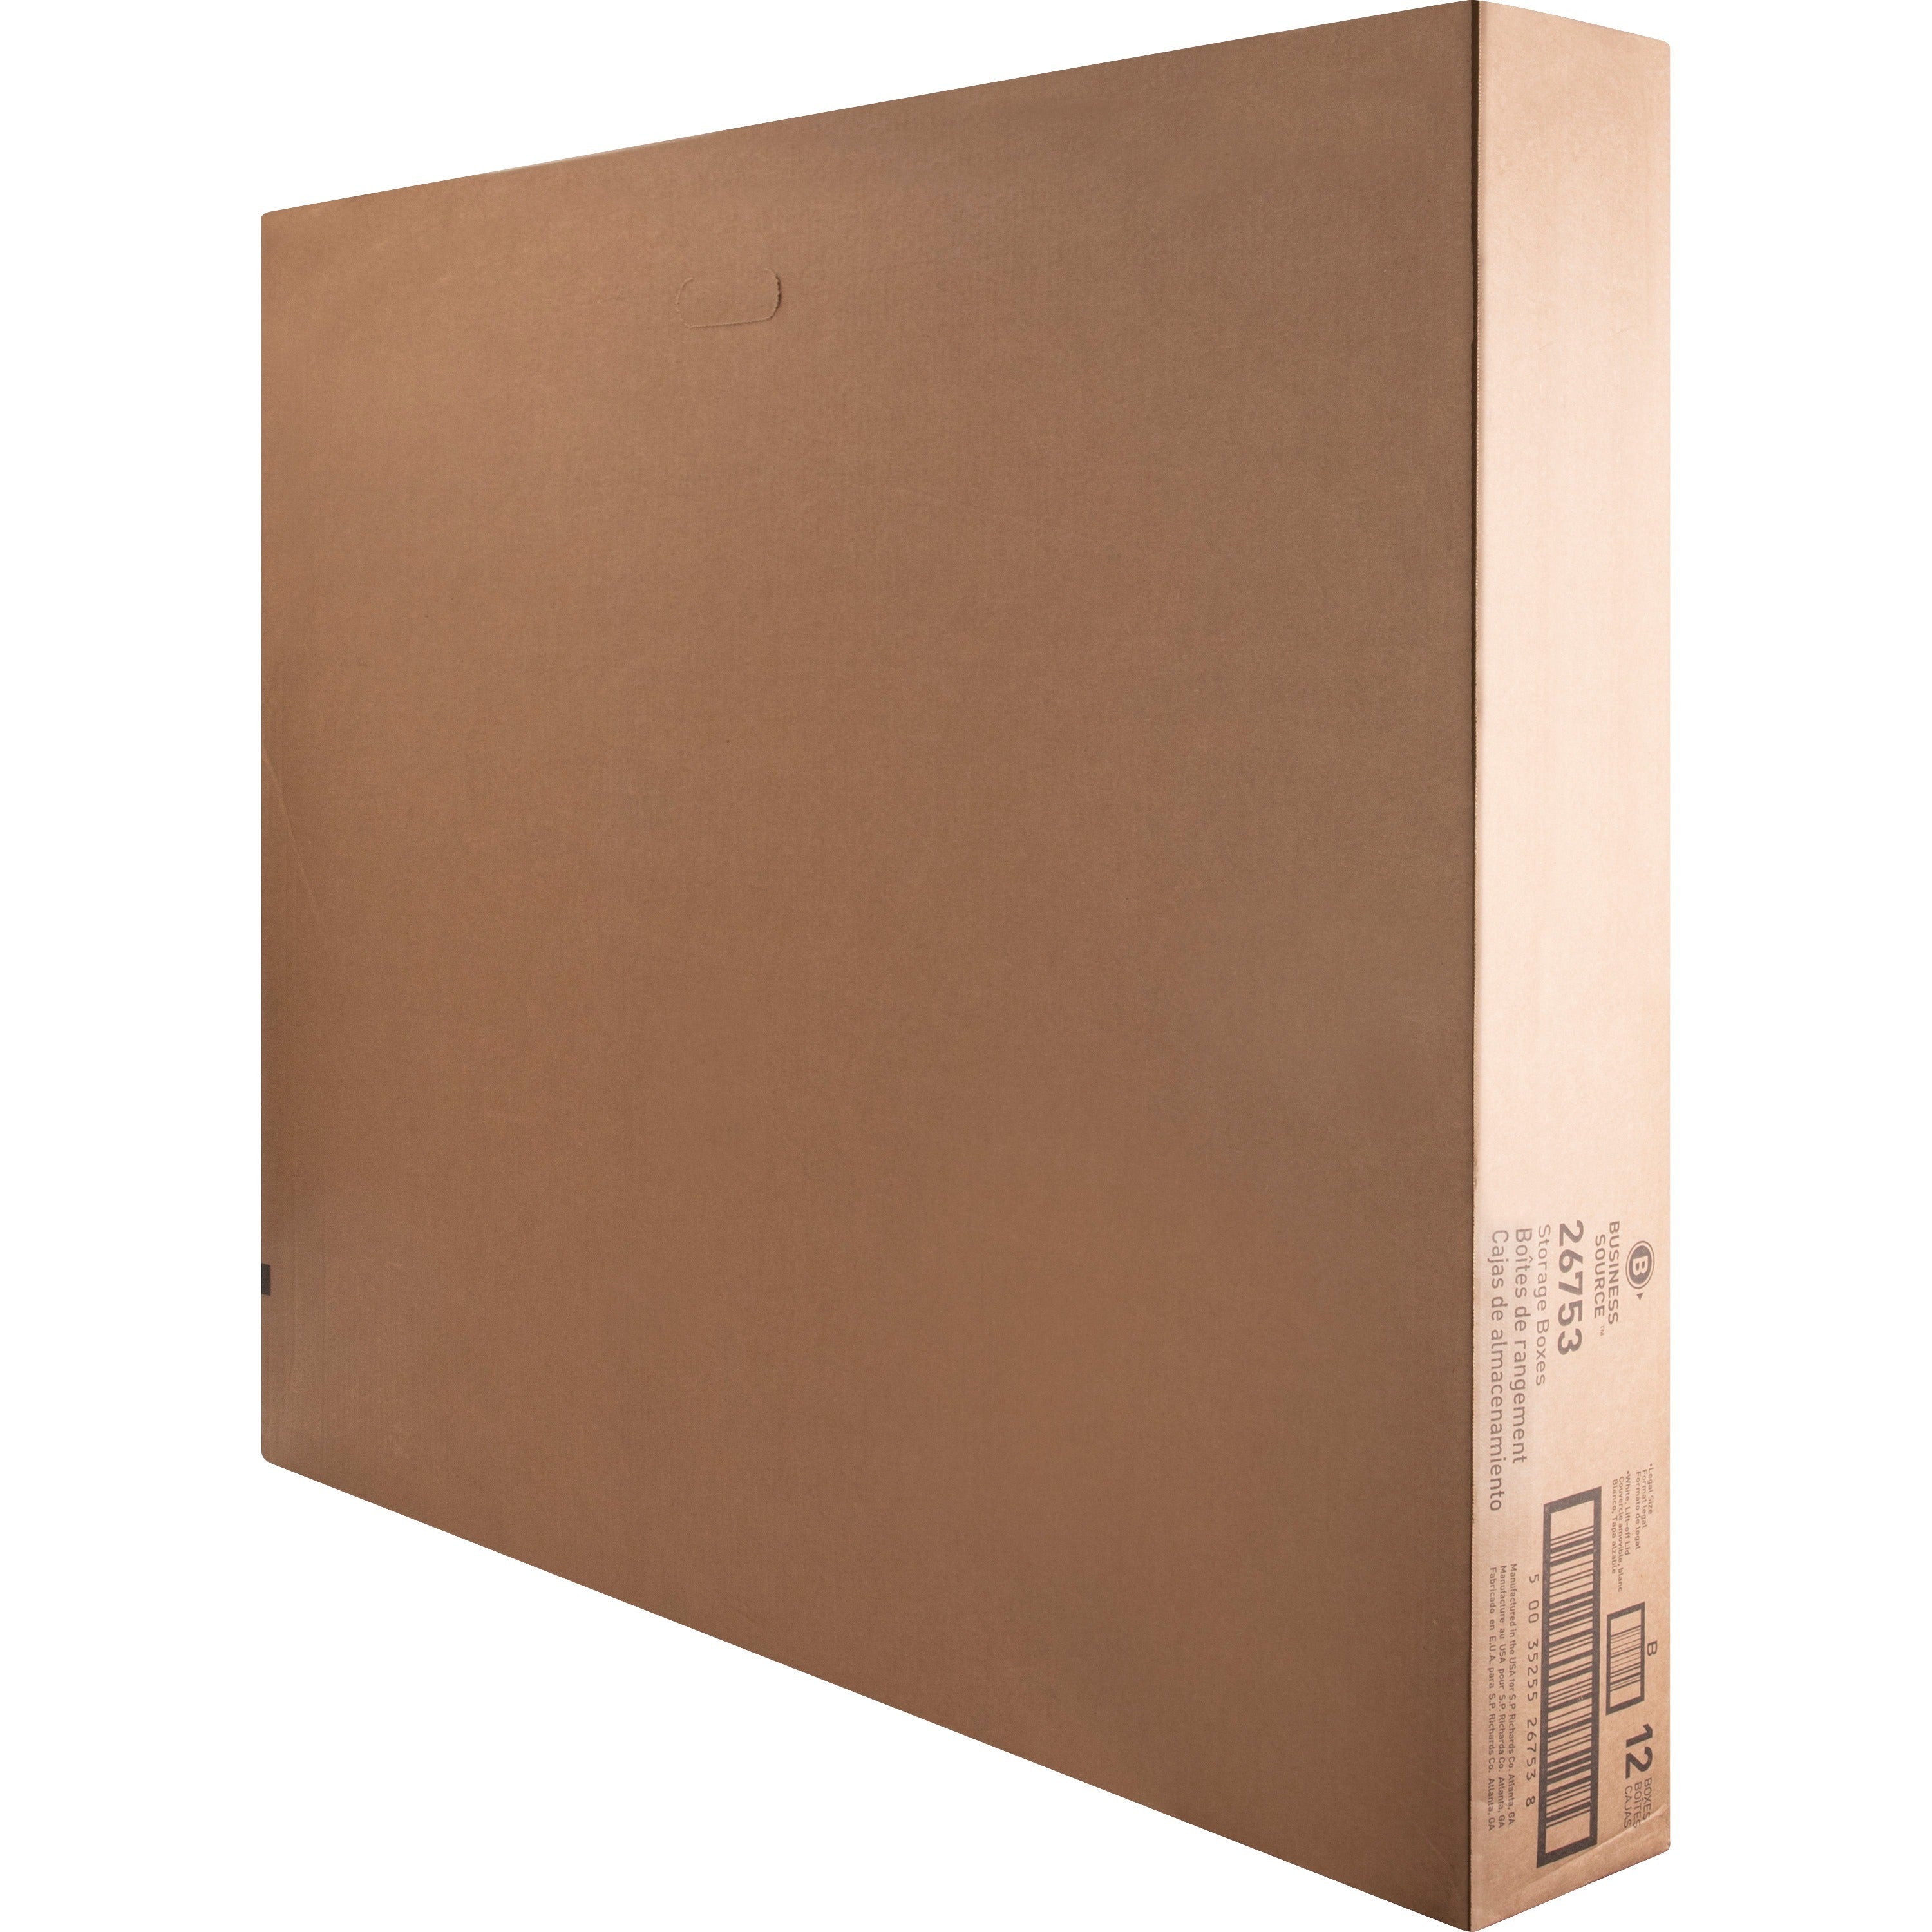 Business Source Lift-off Lid Light Duty Storage Box - External Dimensions: 15" Width x 24" Depth x 10"Height - Media Size Supported: Legal - Lift-off Closure - Light Duty - Stackable - Cardboard - White - For File - Recycled - 12 / Carton - 